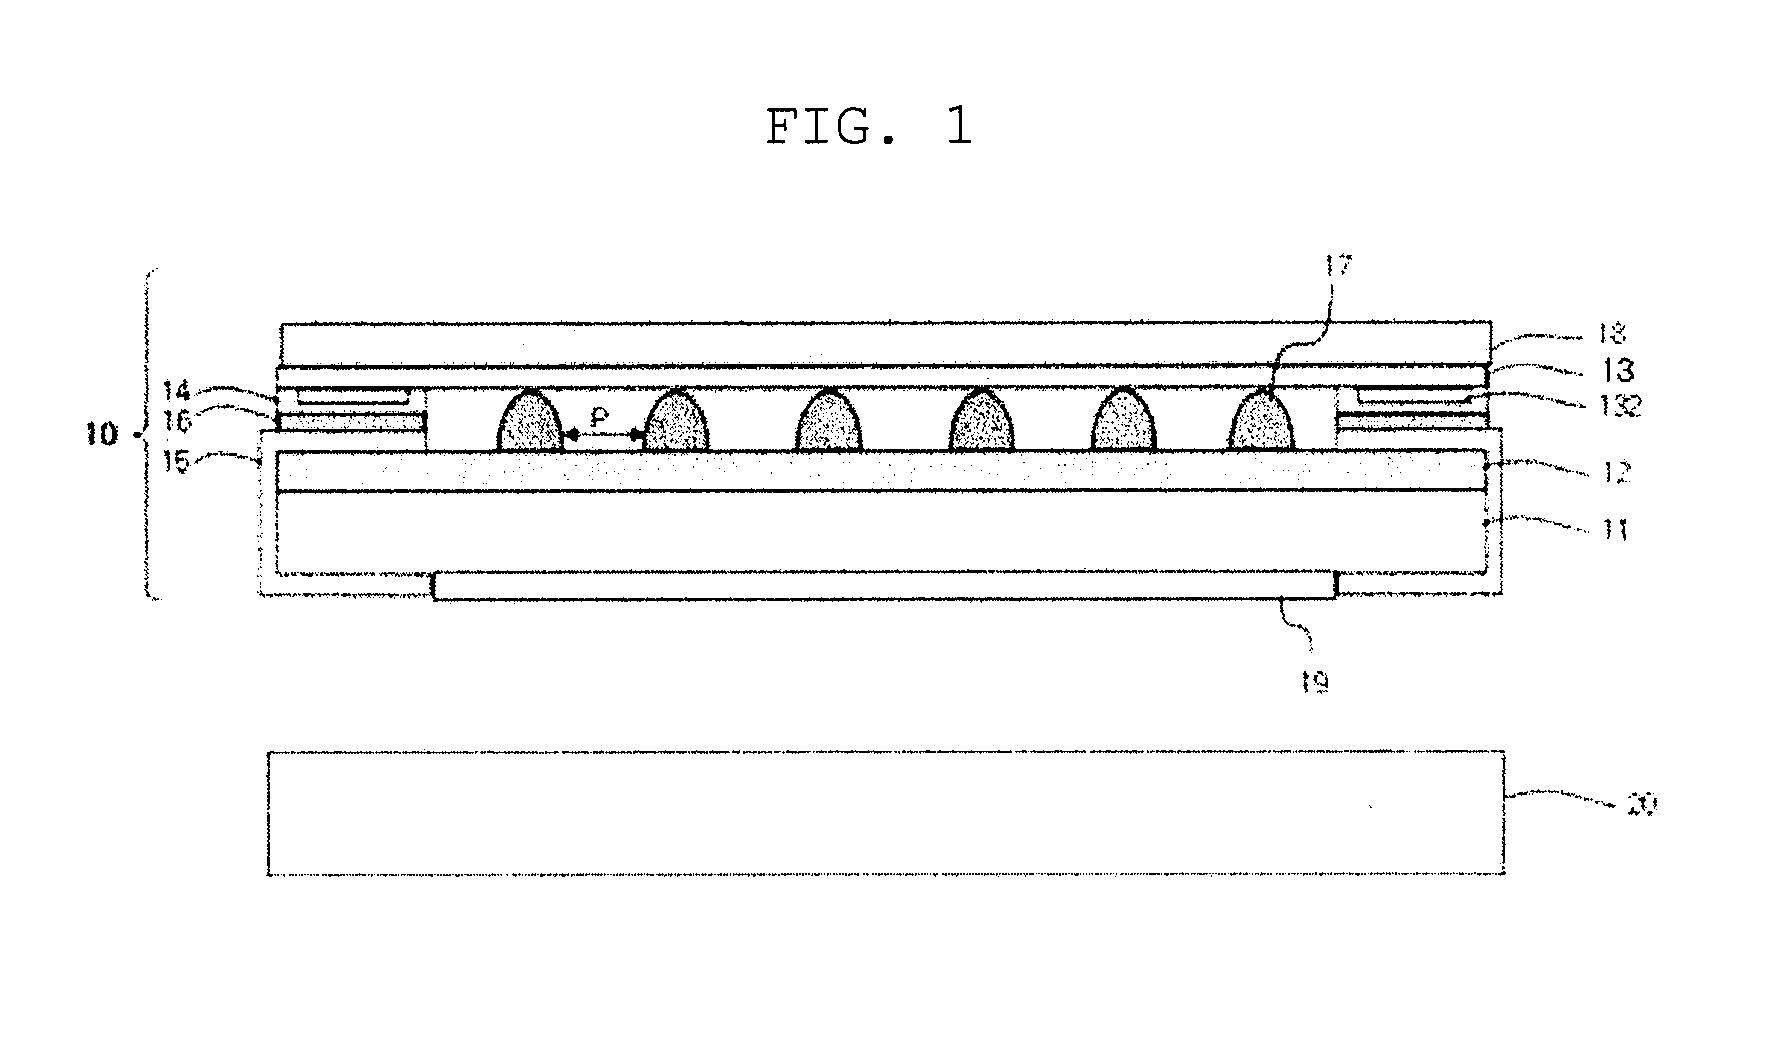 Display filter having touch input function